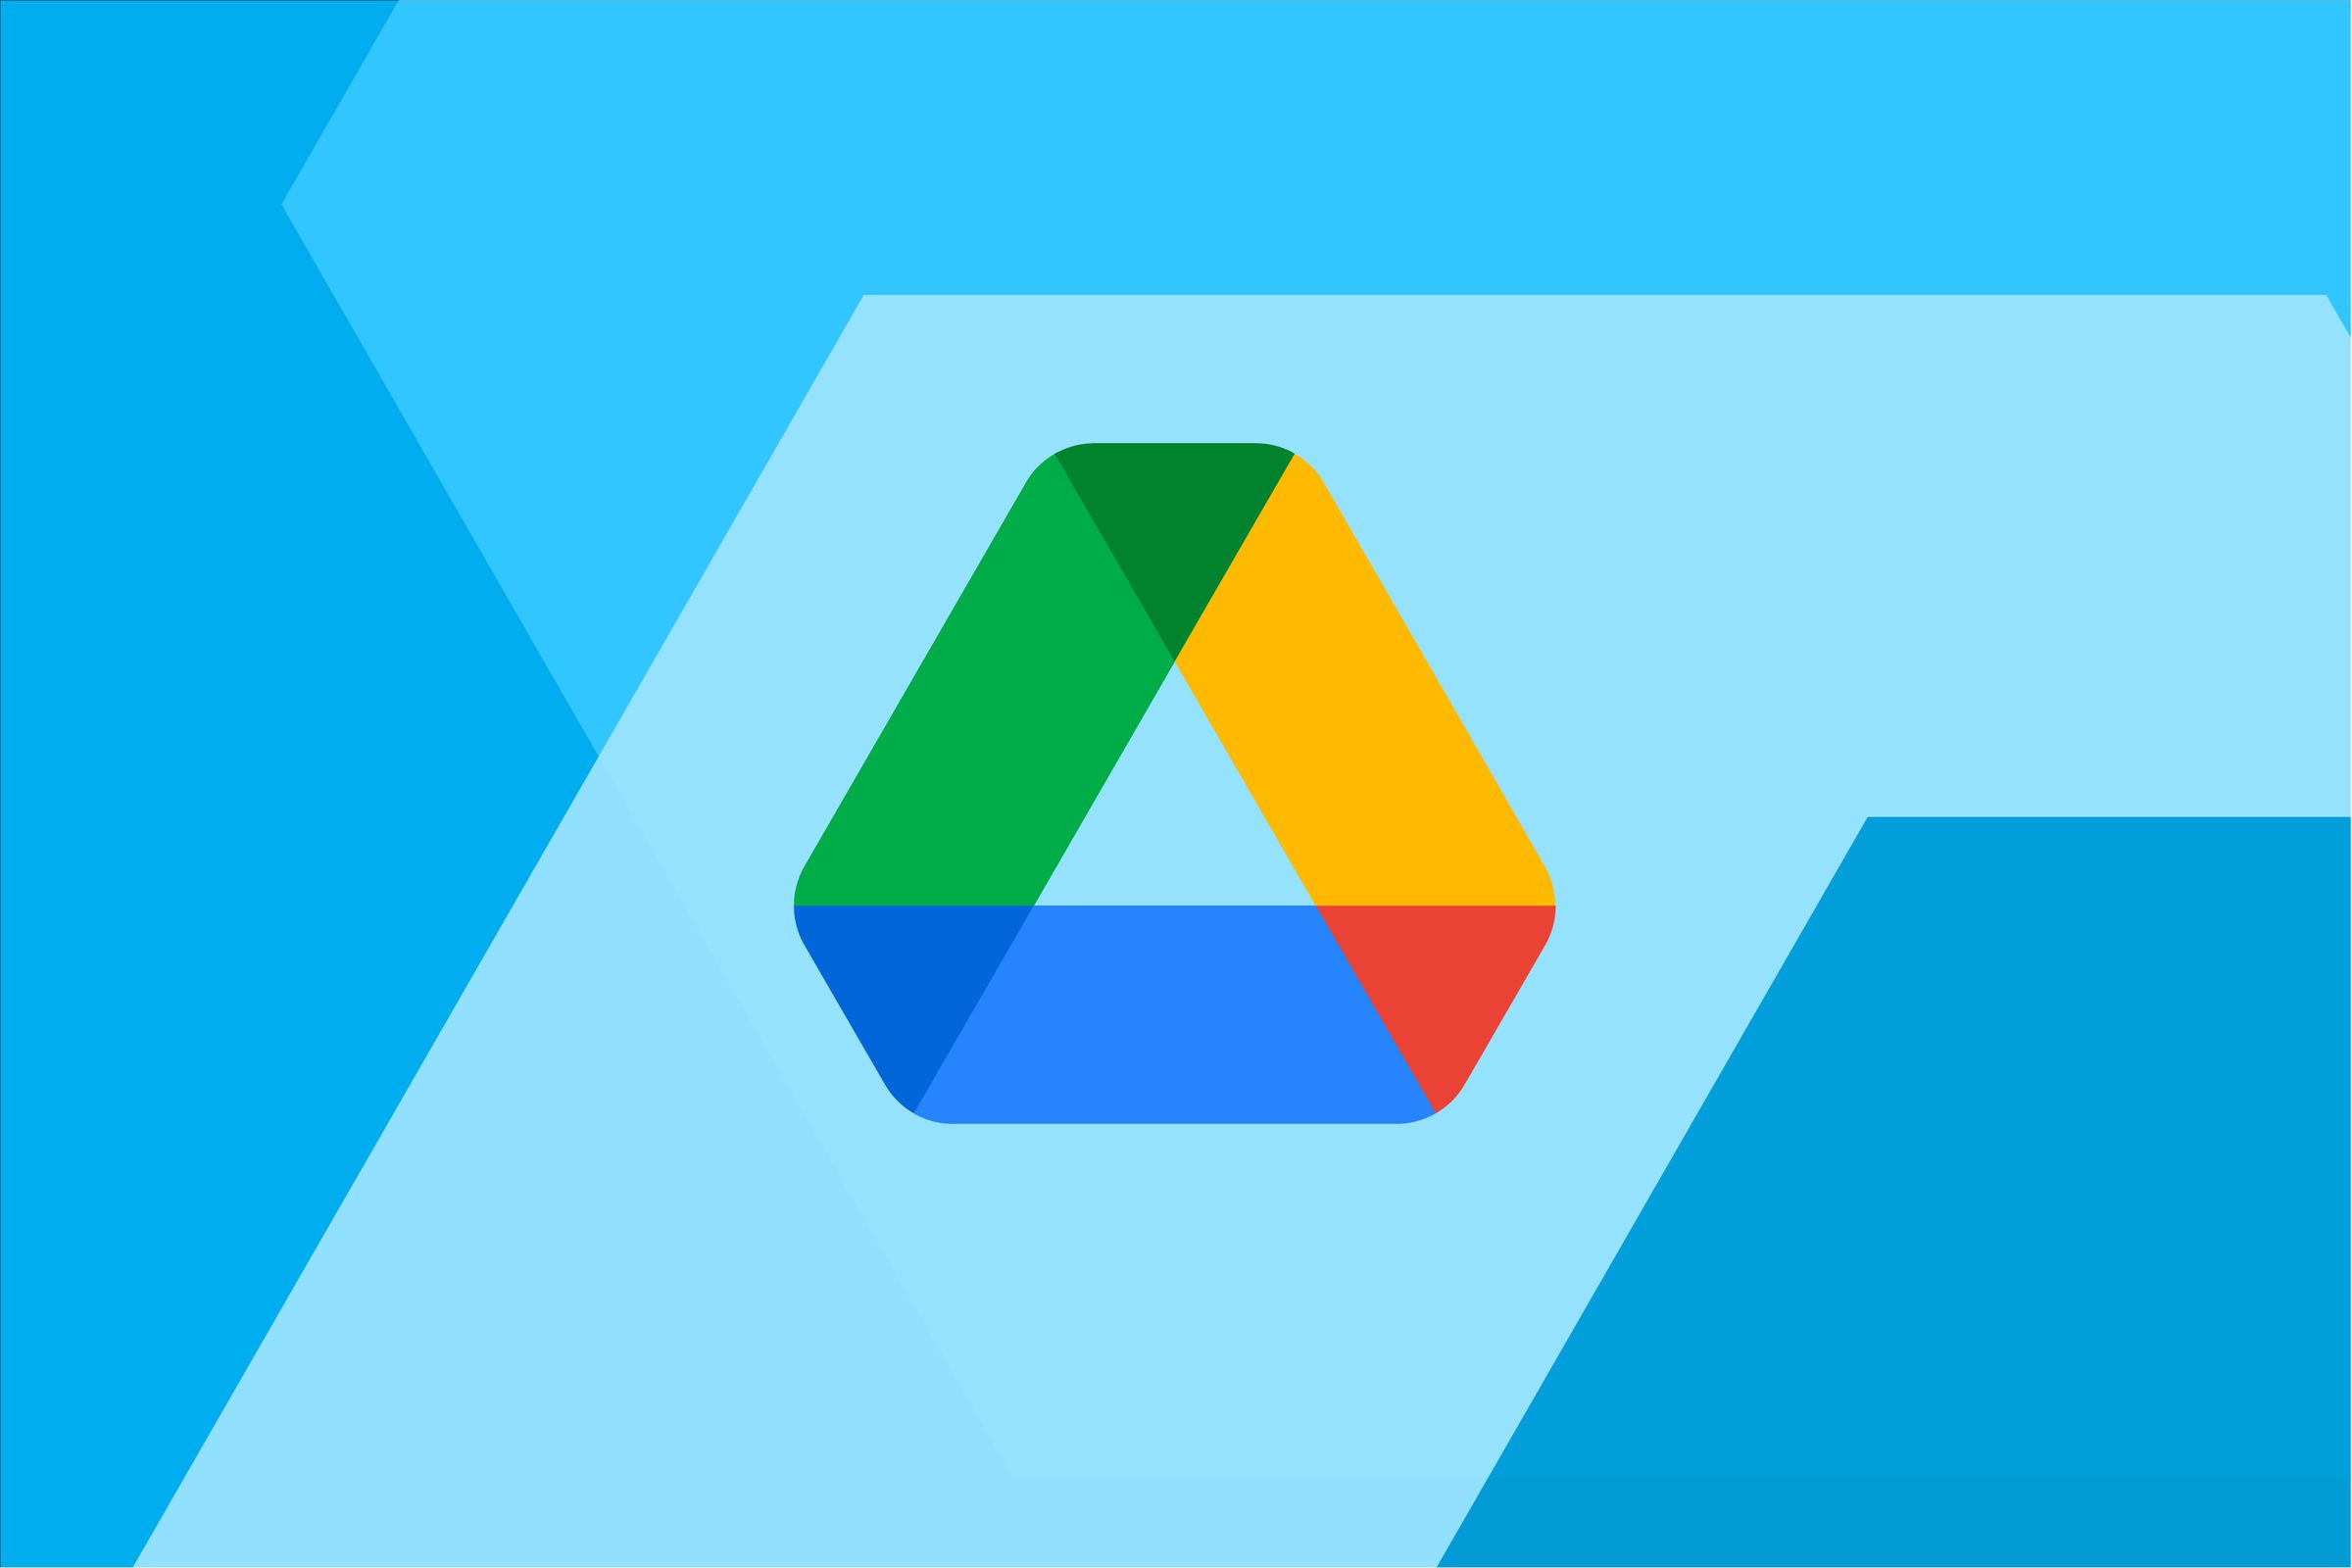 An image showing the Google Drive logo on a blue background